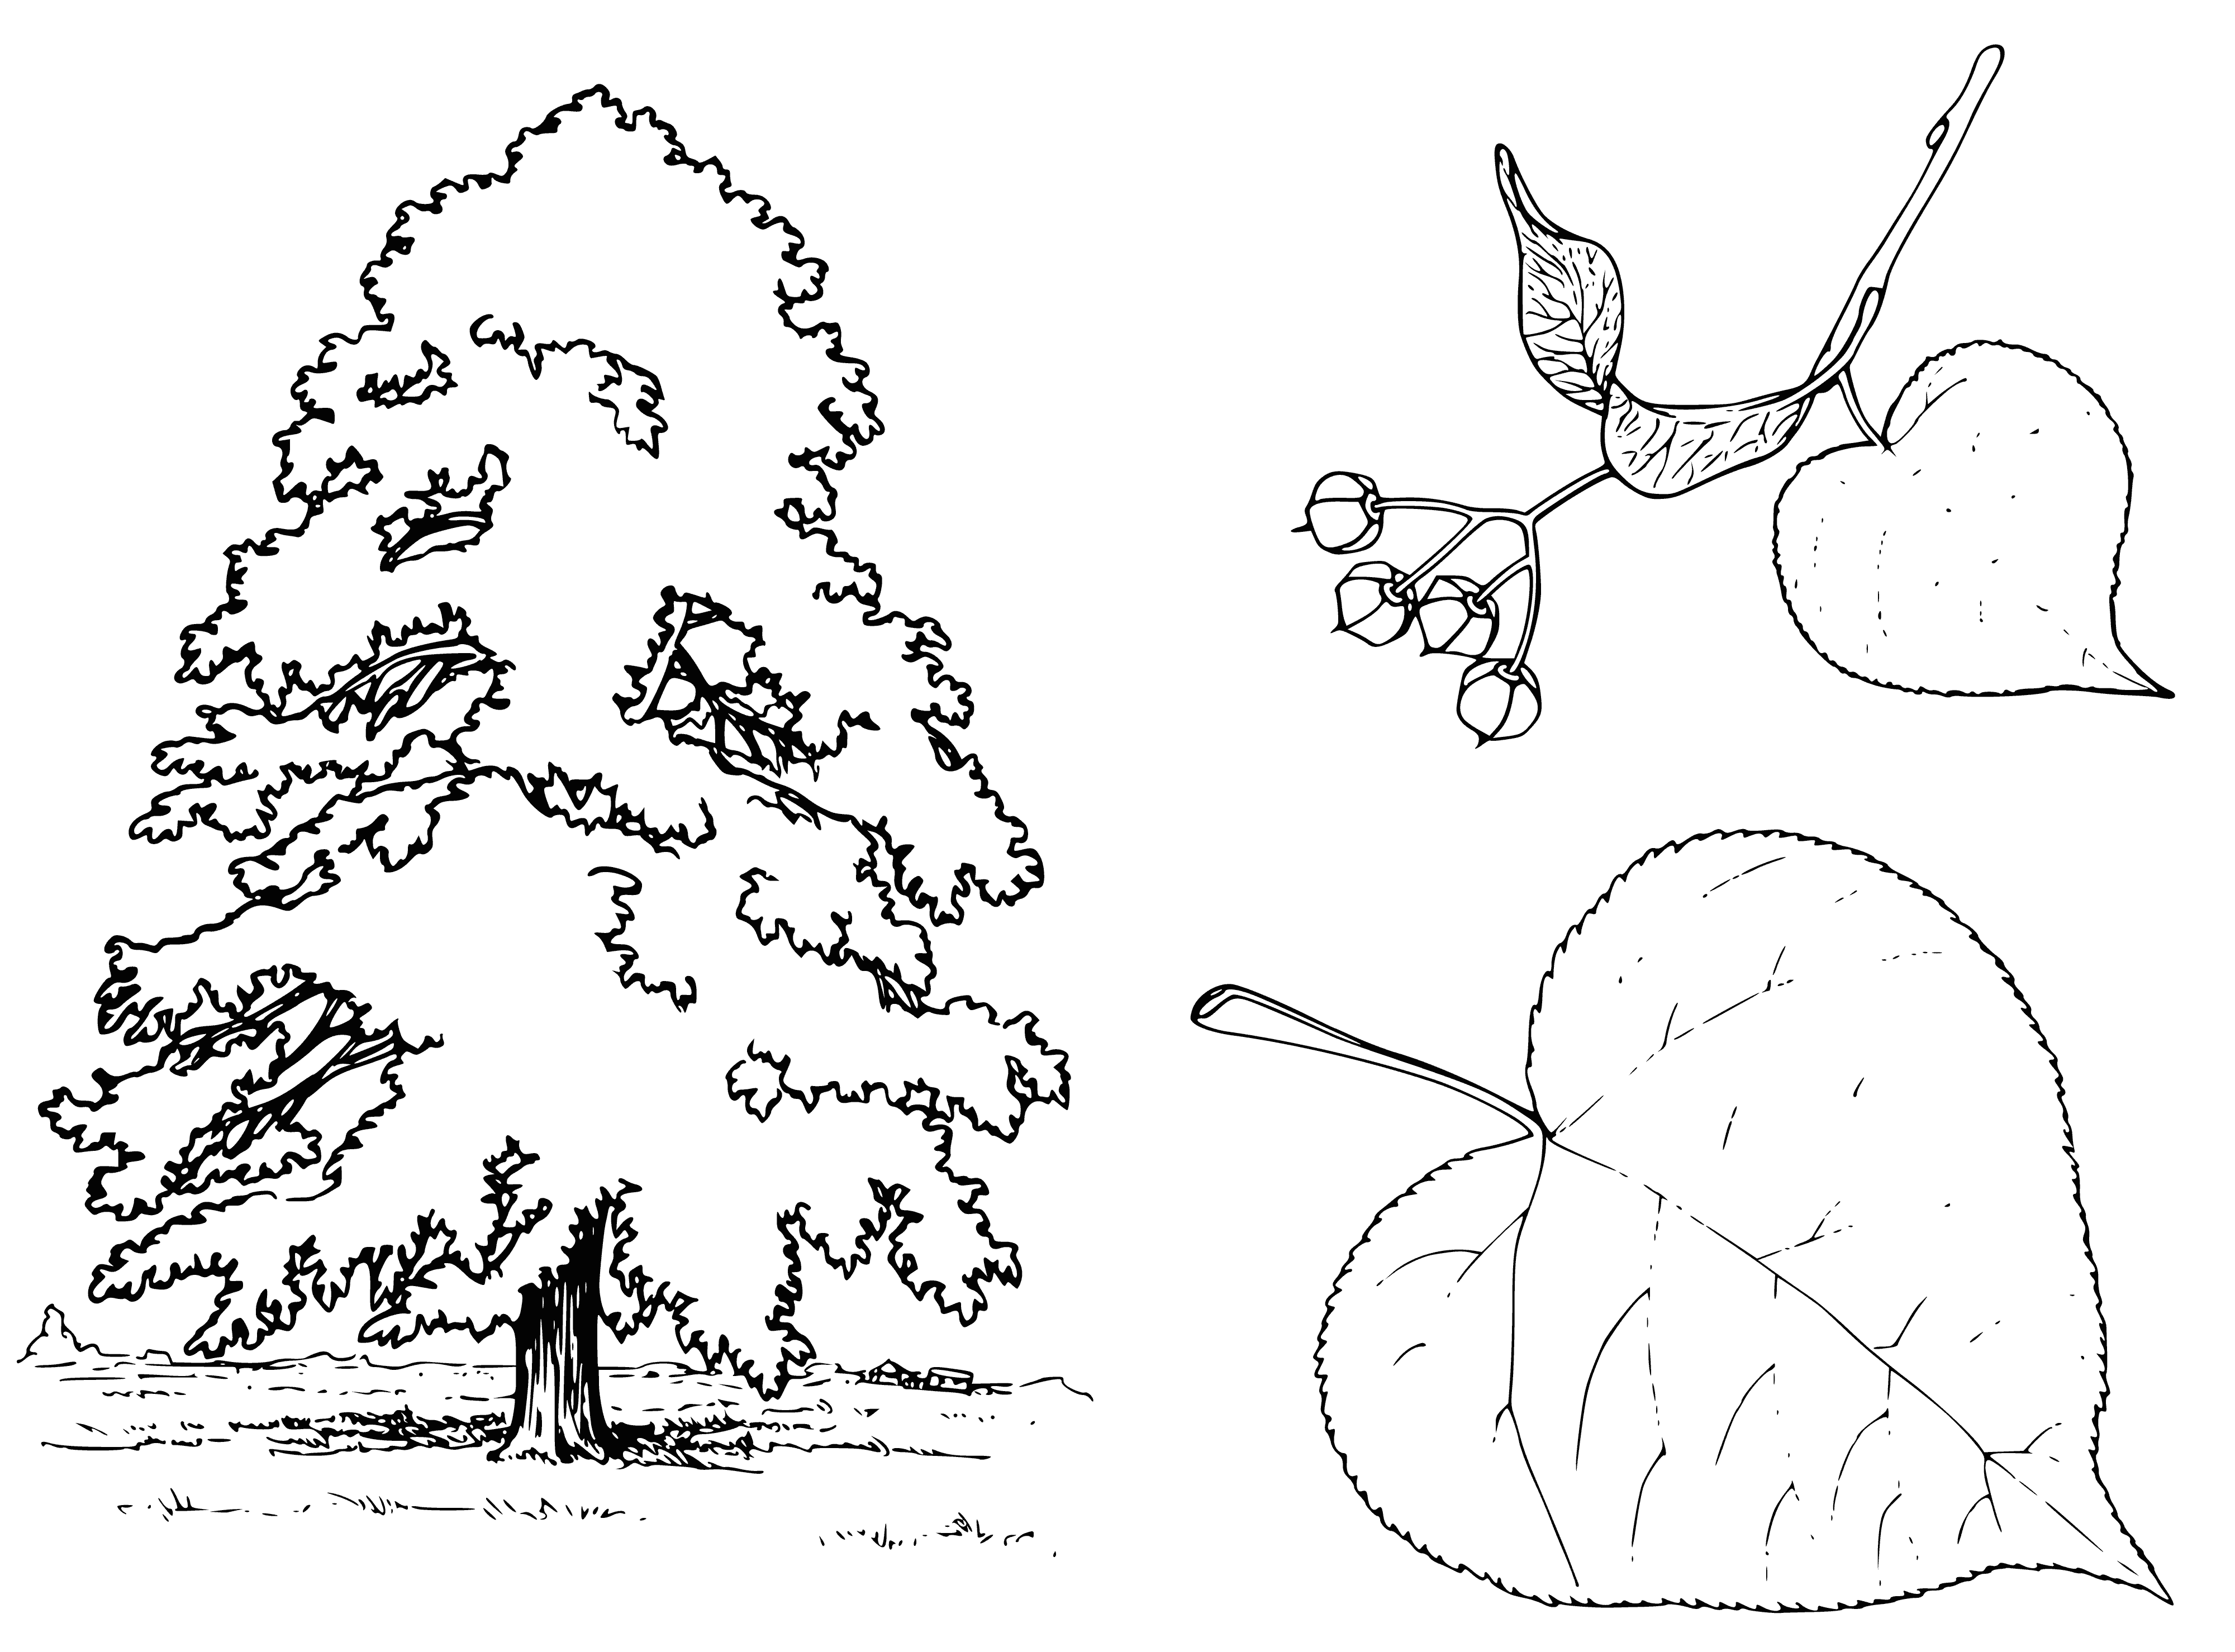 coloring page: Tall, thin Linden tree: round leaves, straight branches, brown bark, yellow leaves, close together. #nature #trees